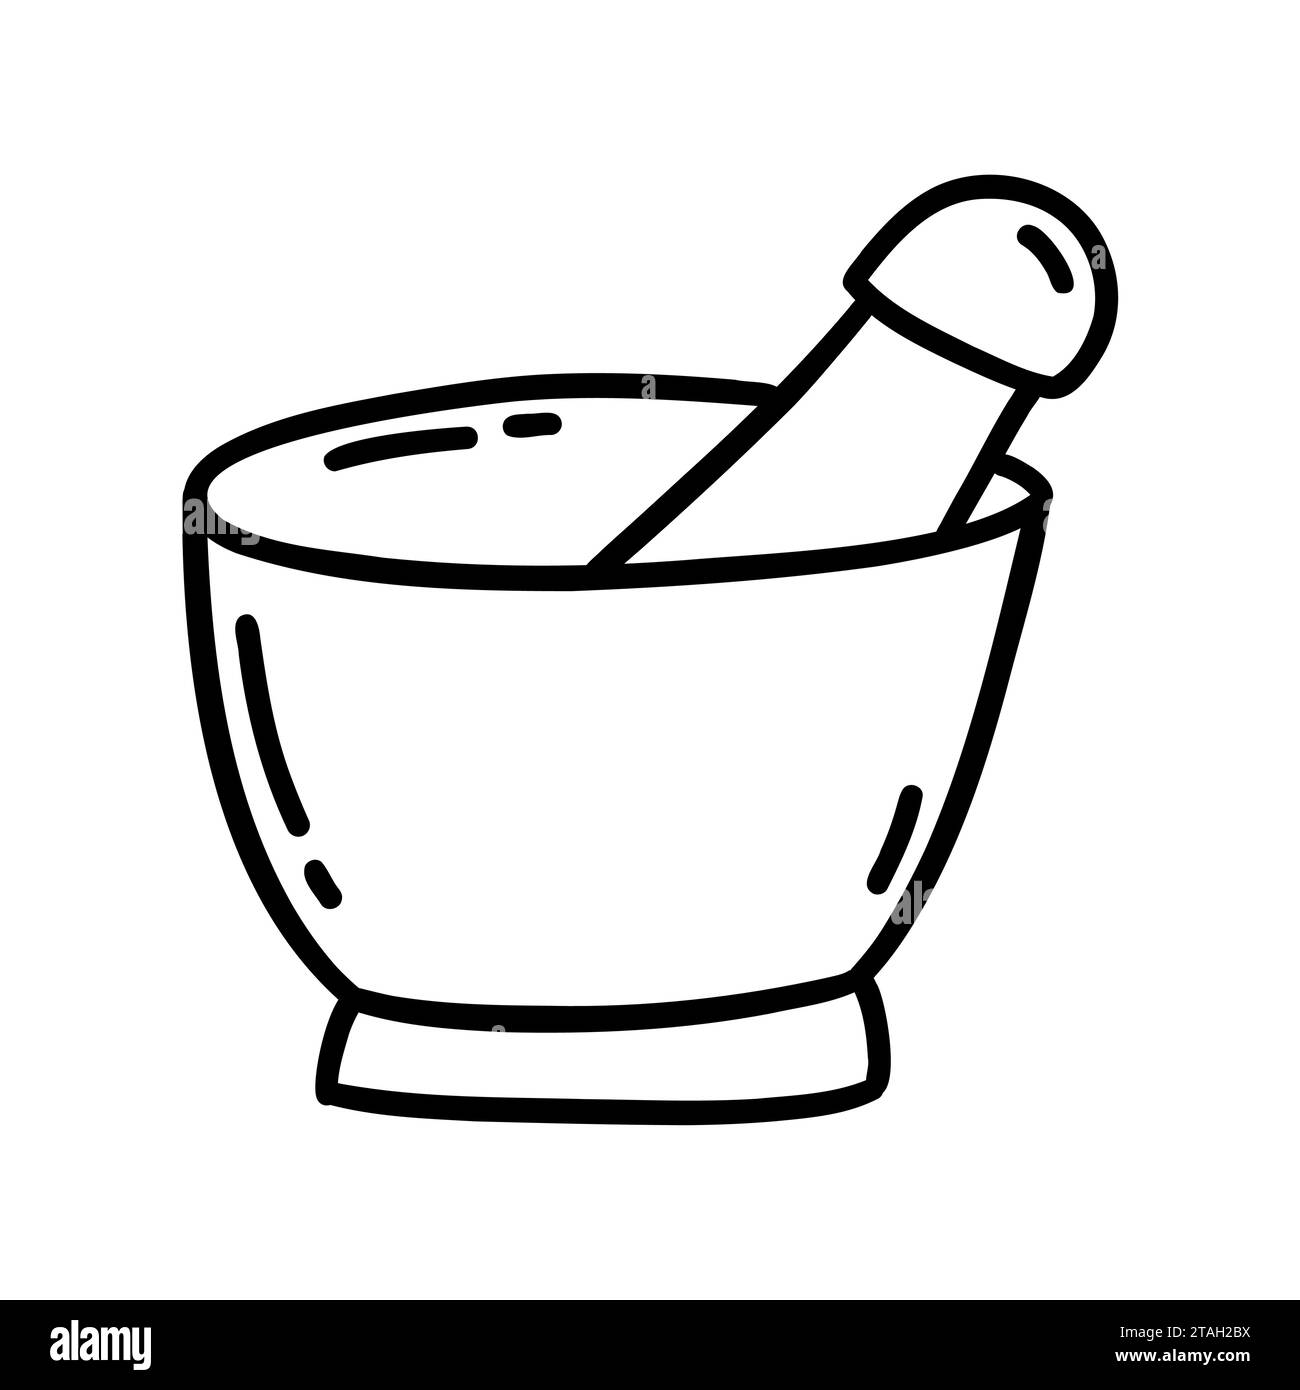 Mortar and pestle. Vintage bowl for chopping and kneading herbs and spices. Alternative medicine, herbalism, healing, magic. Black and white vector is Stock Vector